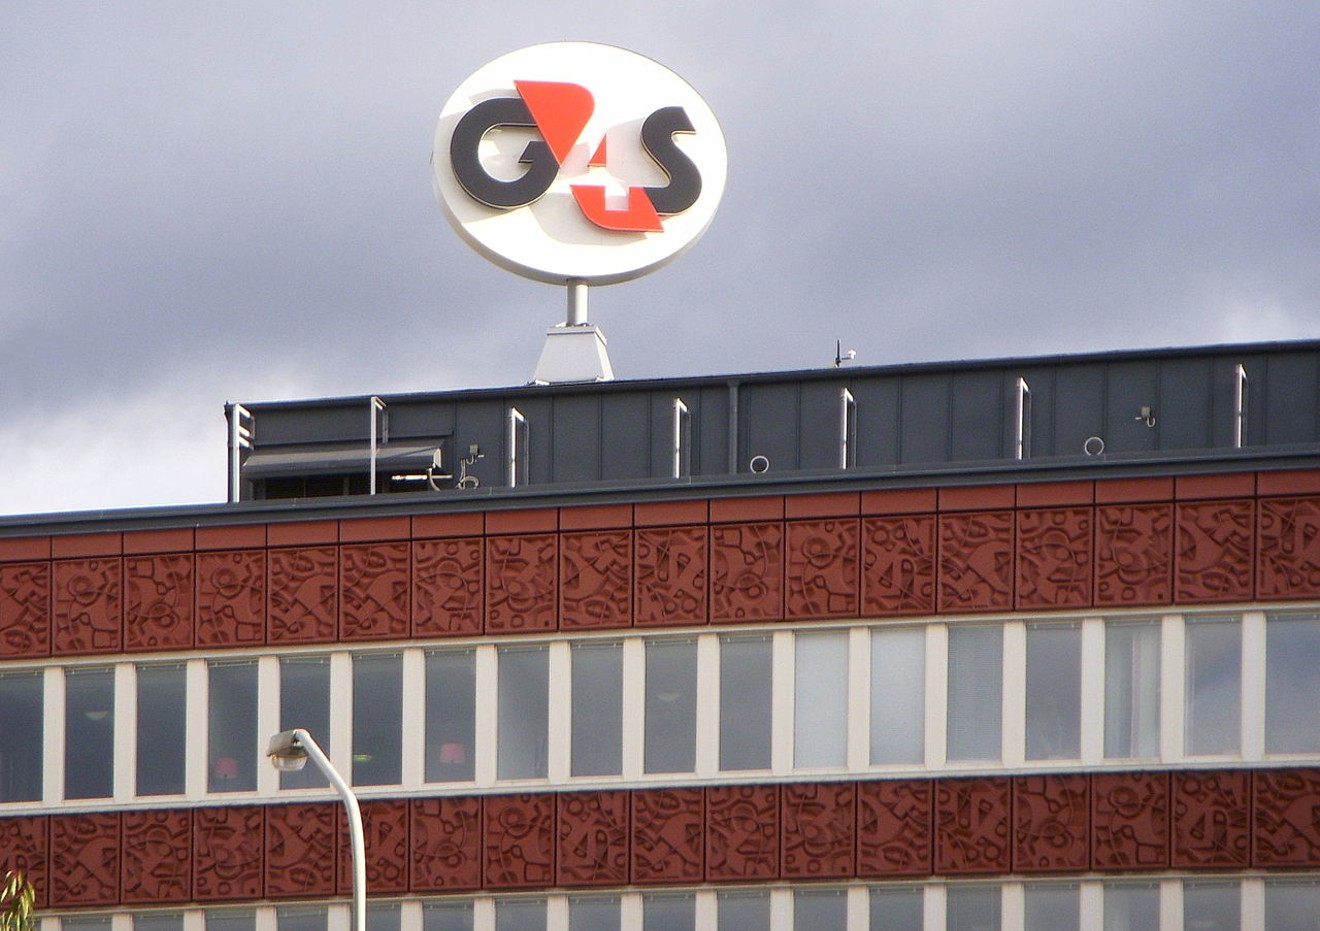 A G4S building in Sweden.